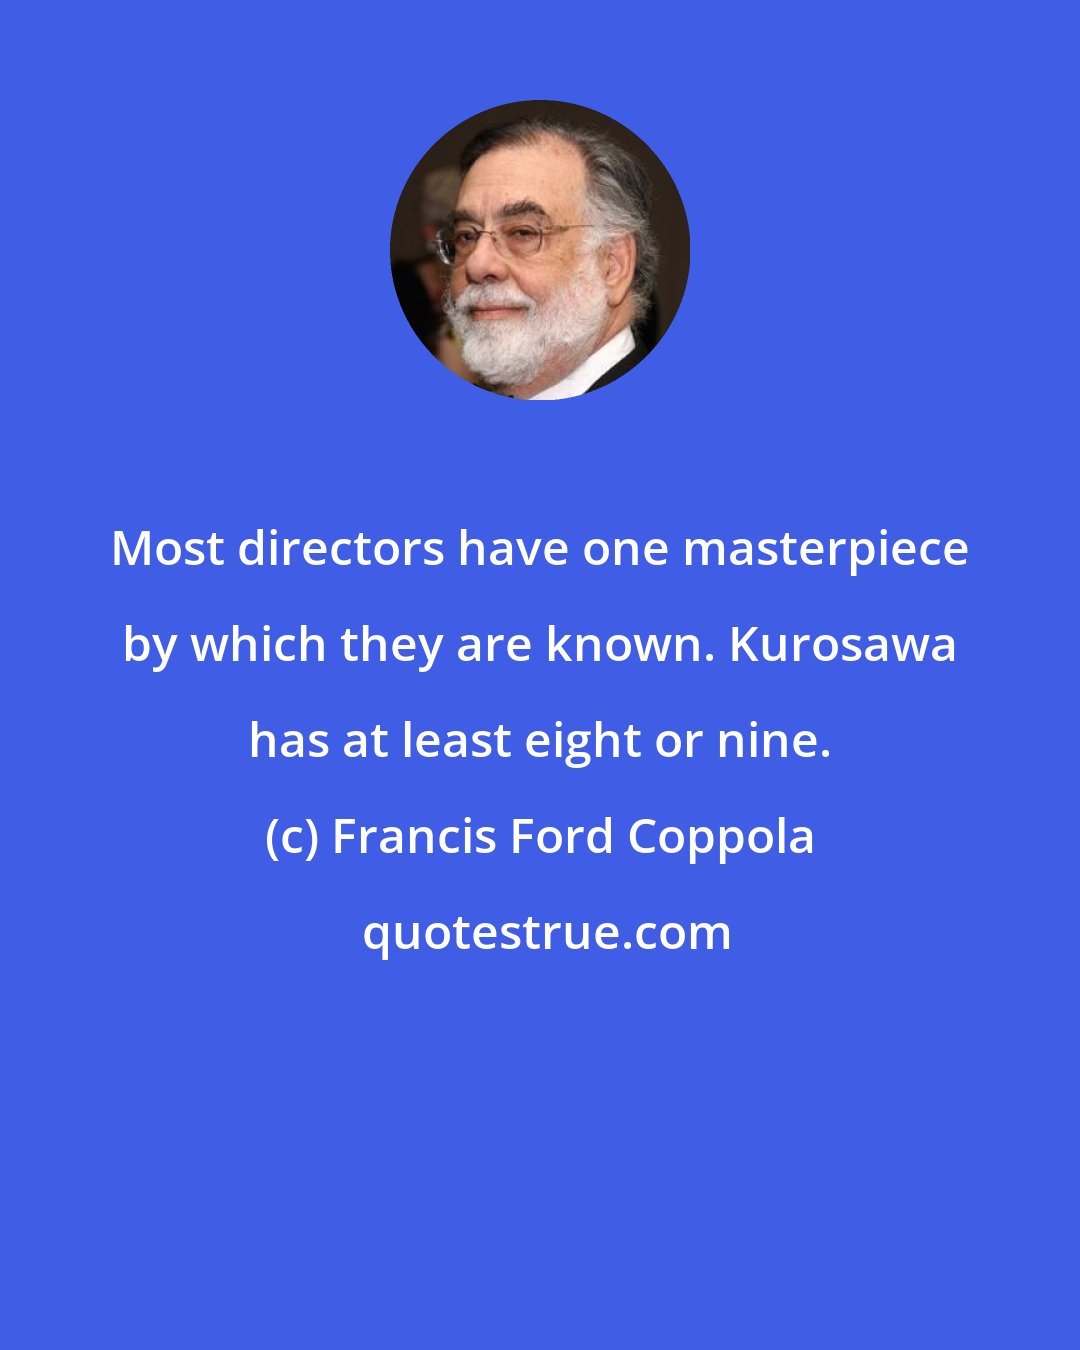 Francis Ford Coppola: Most directors have one masterpiece by which they are known. Kurosawa has at least eight or nine.